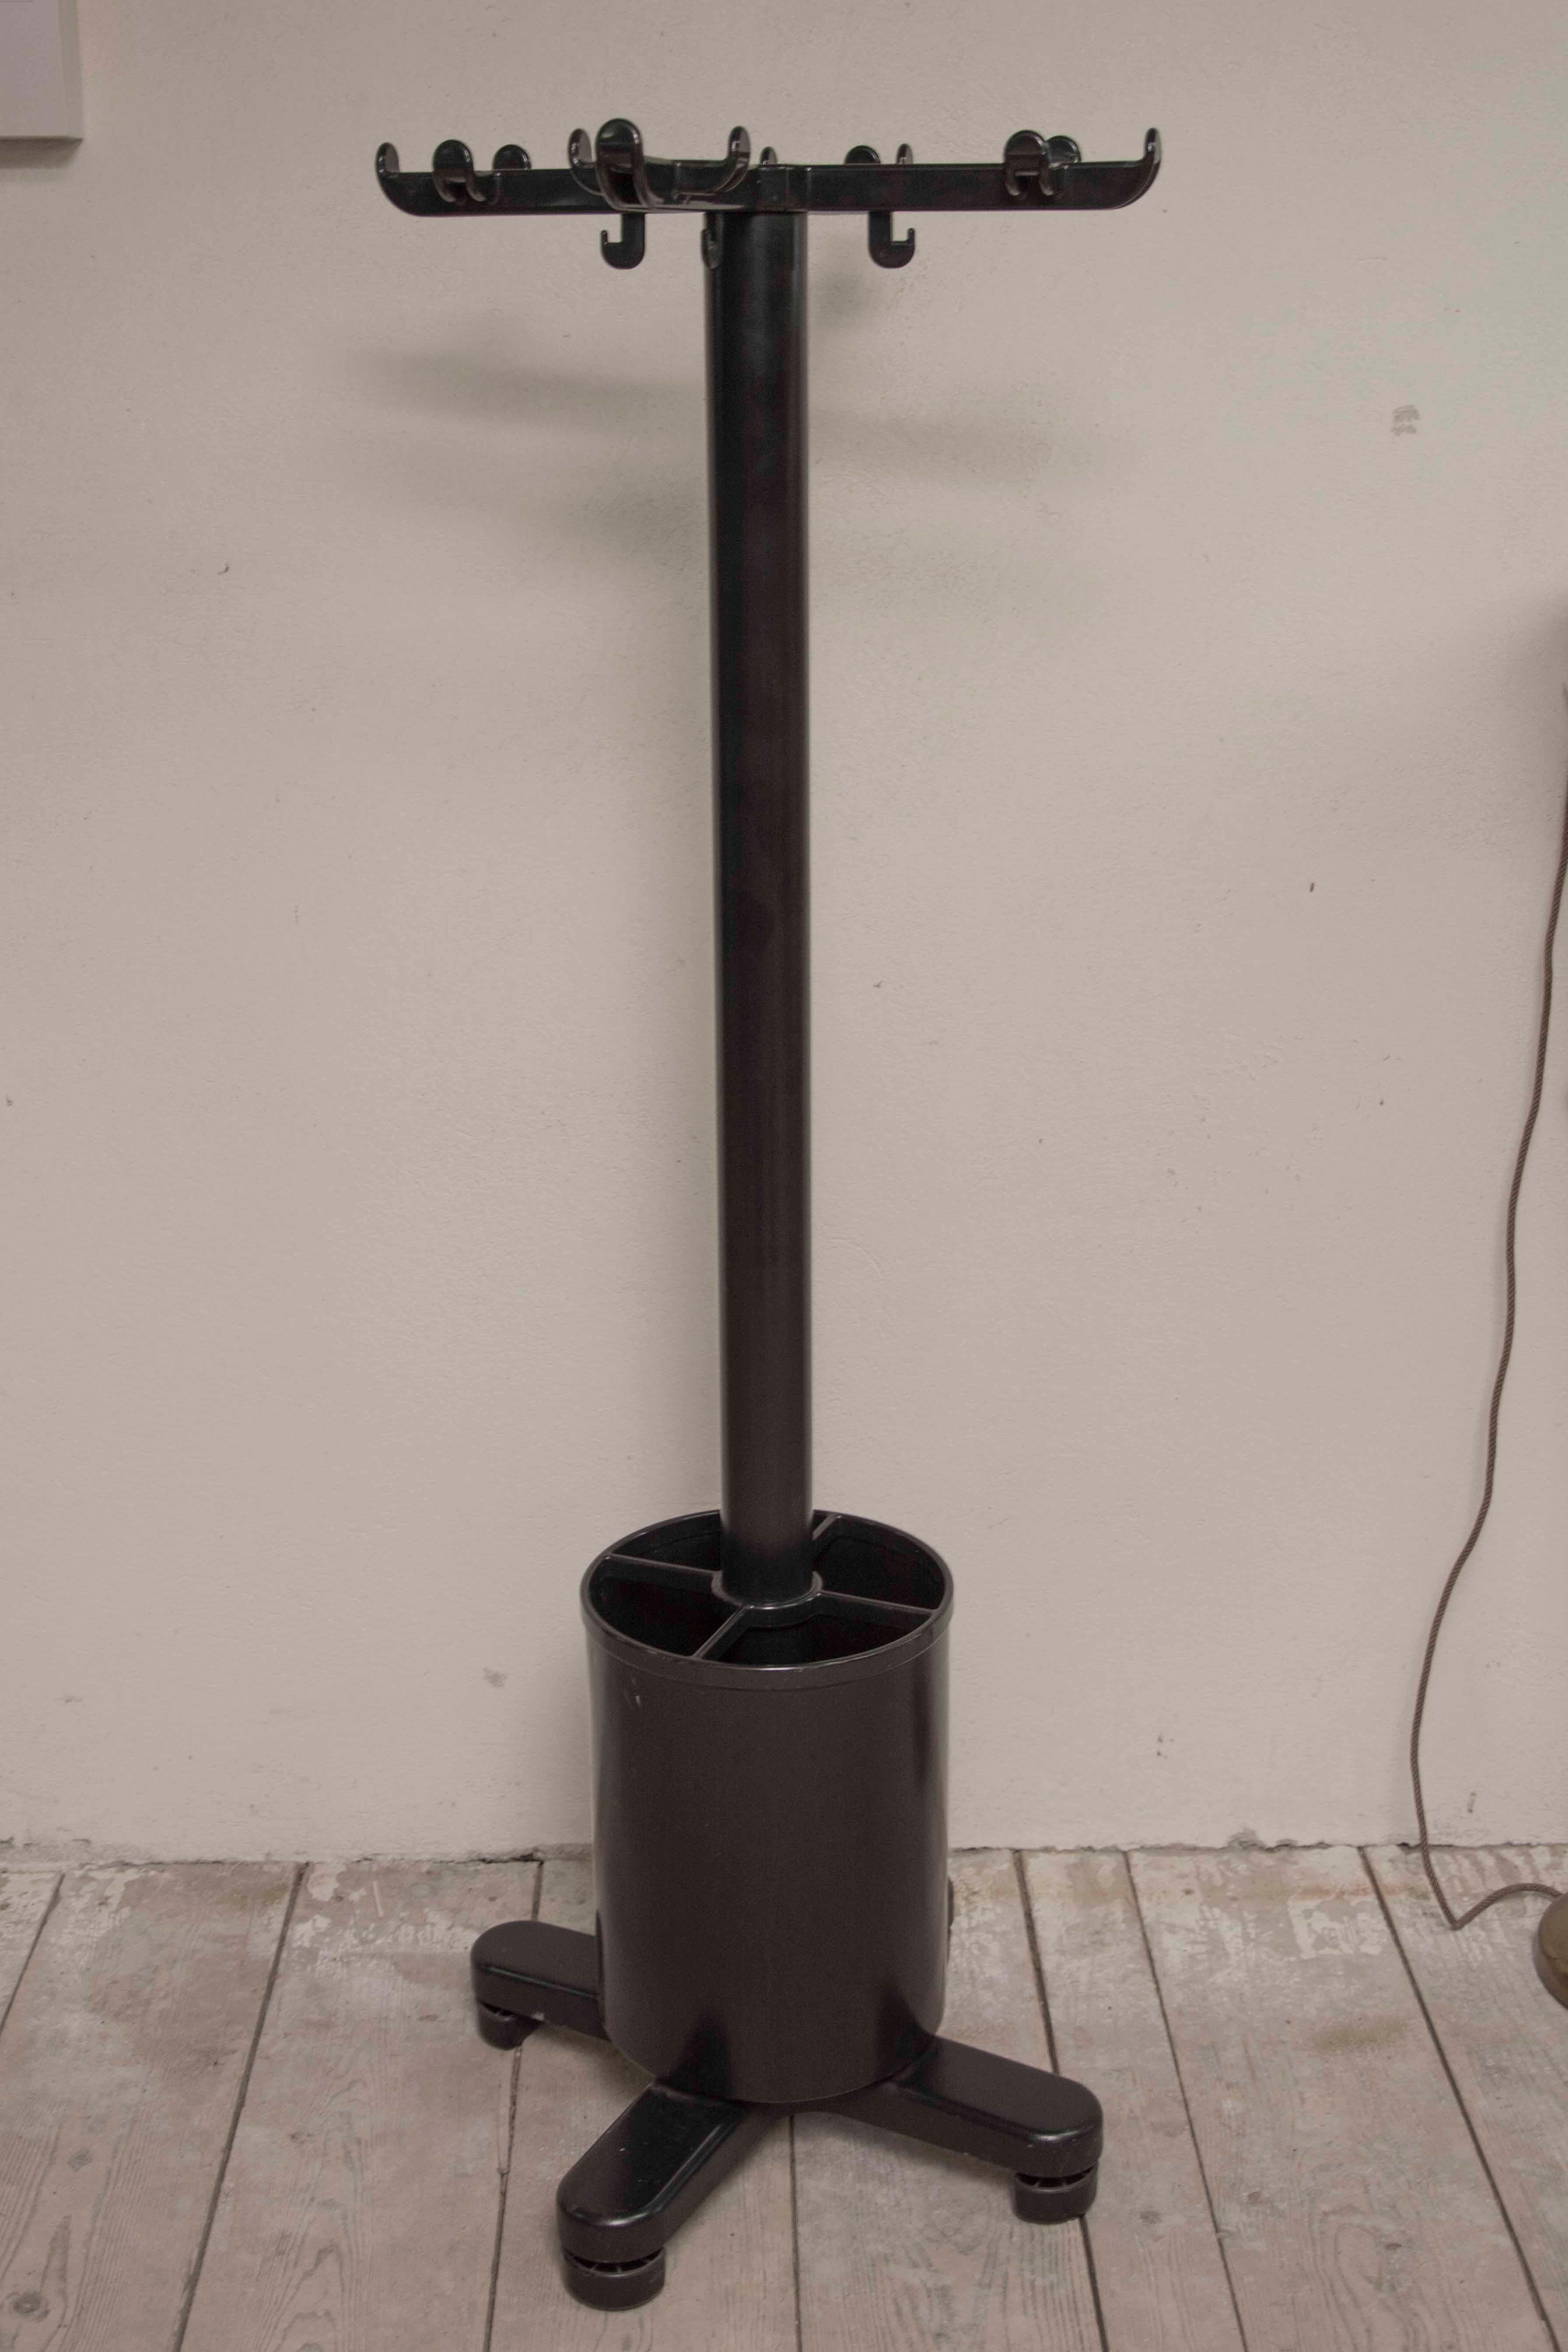 These freestanding coat rack were designed in 1973 by Ettore Sottsass for Olivetti and produced in Italy. It features an umbrella stand resting on the base. It was constructed of steel, aluminium and plastic. Wear consistent with age and use. It´s a